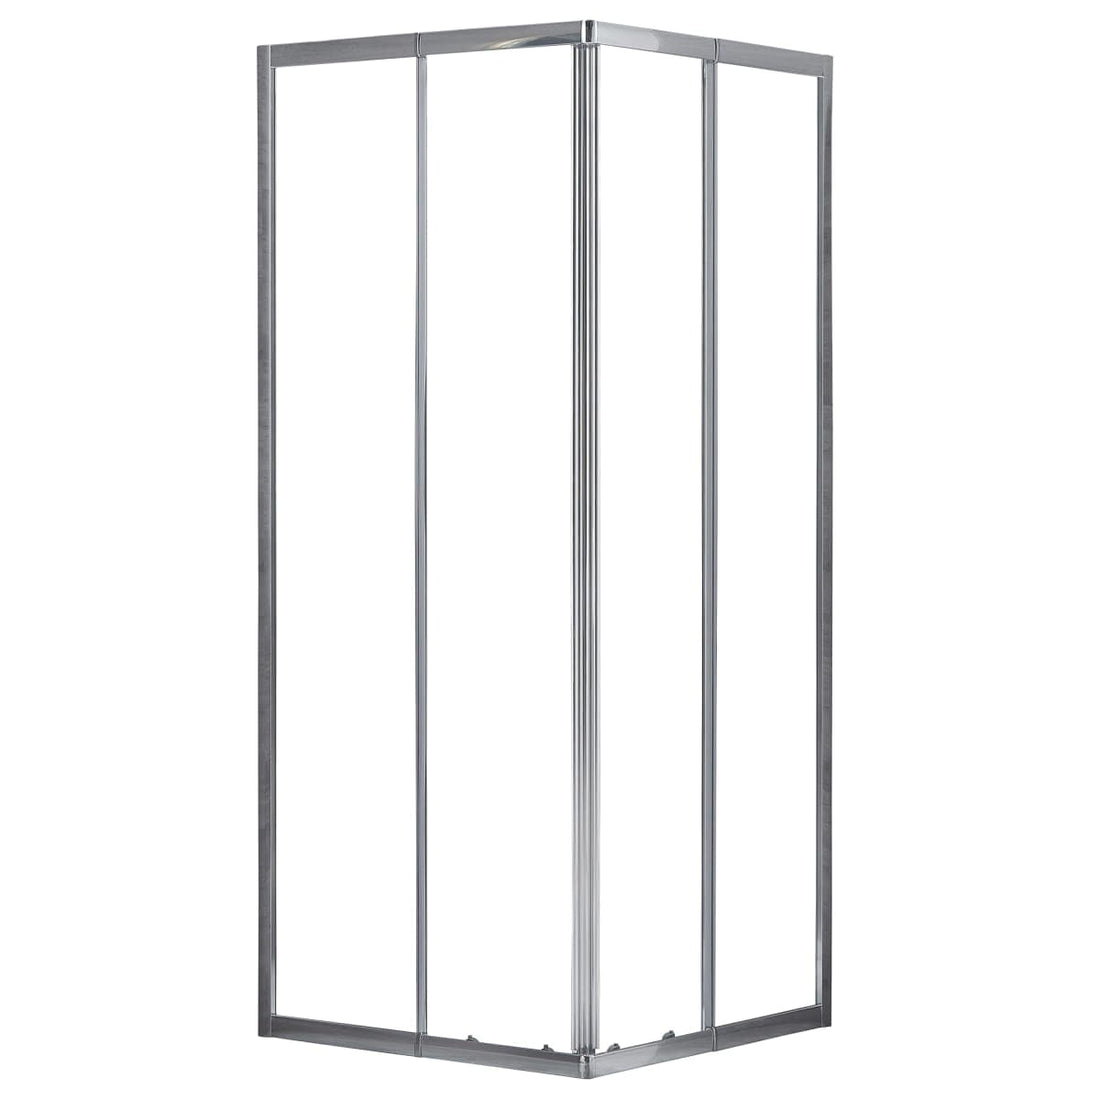 ESSENTIAL SQUARE SHOWER CUBICLE 70-80X70-80 H180 CM CLEAR GLASS CHROME FRAME - best price from Maltashopper.com BR430008890